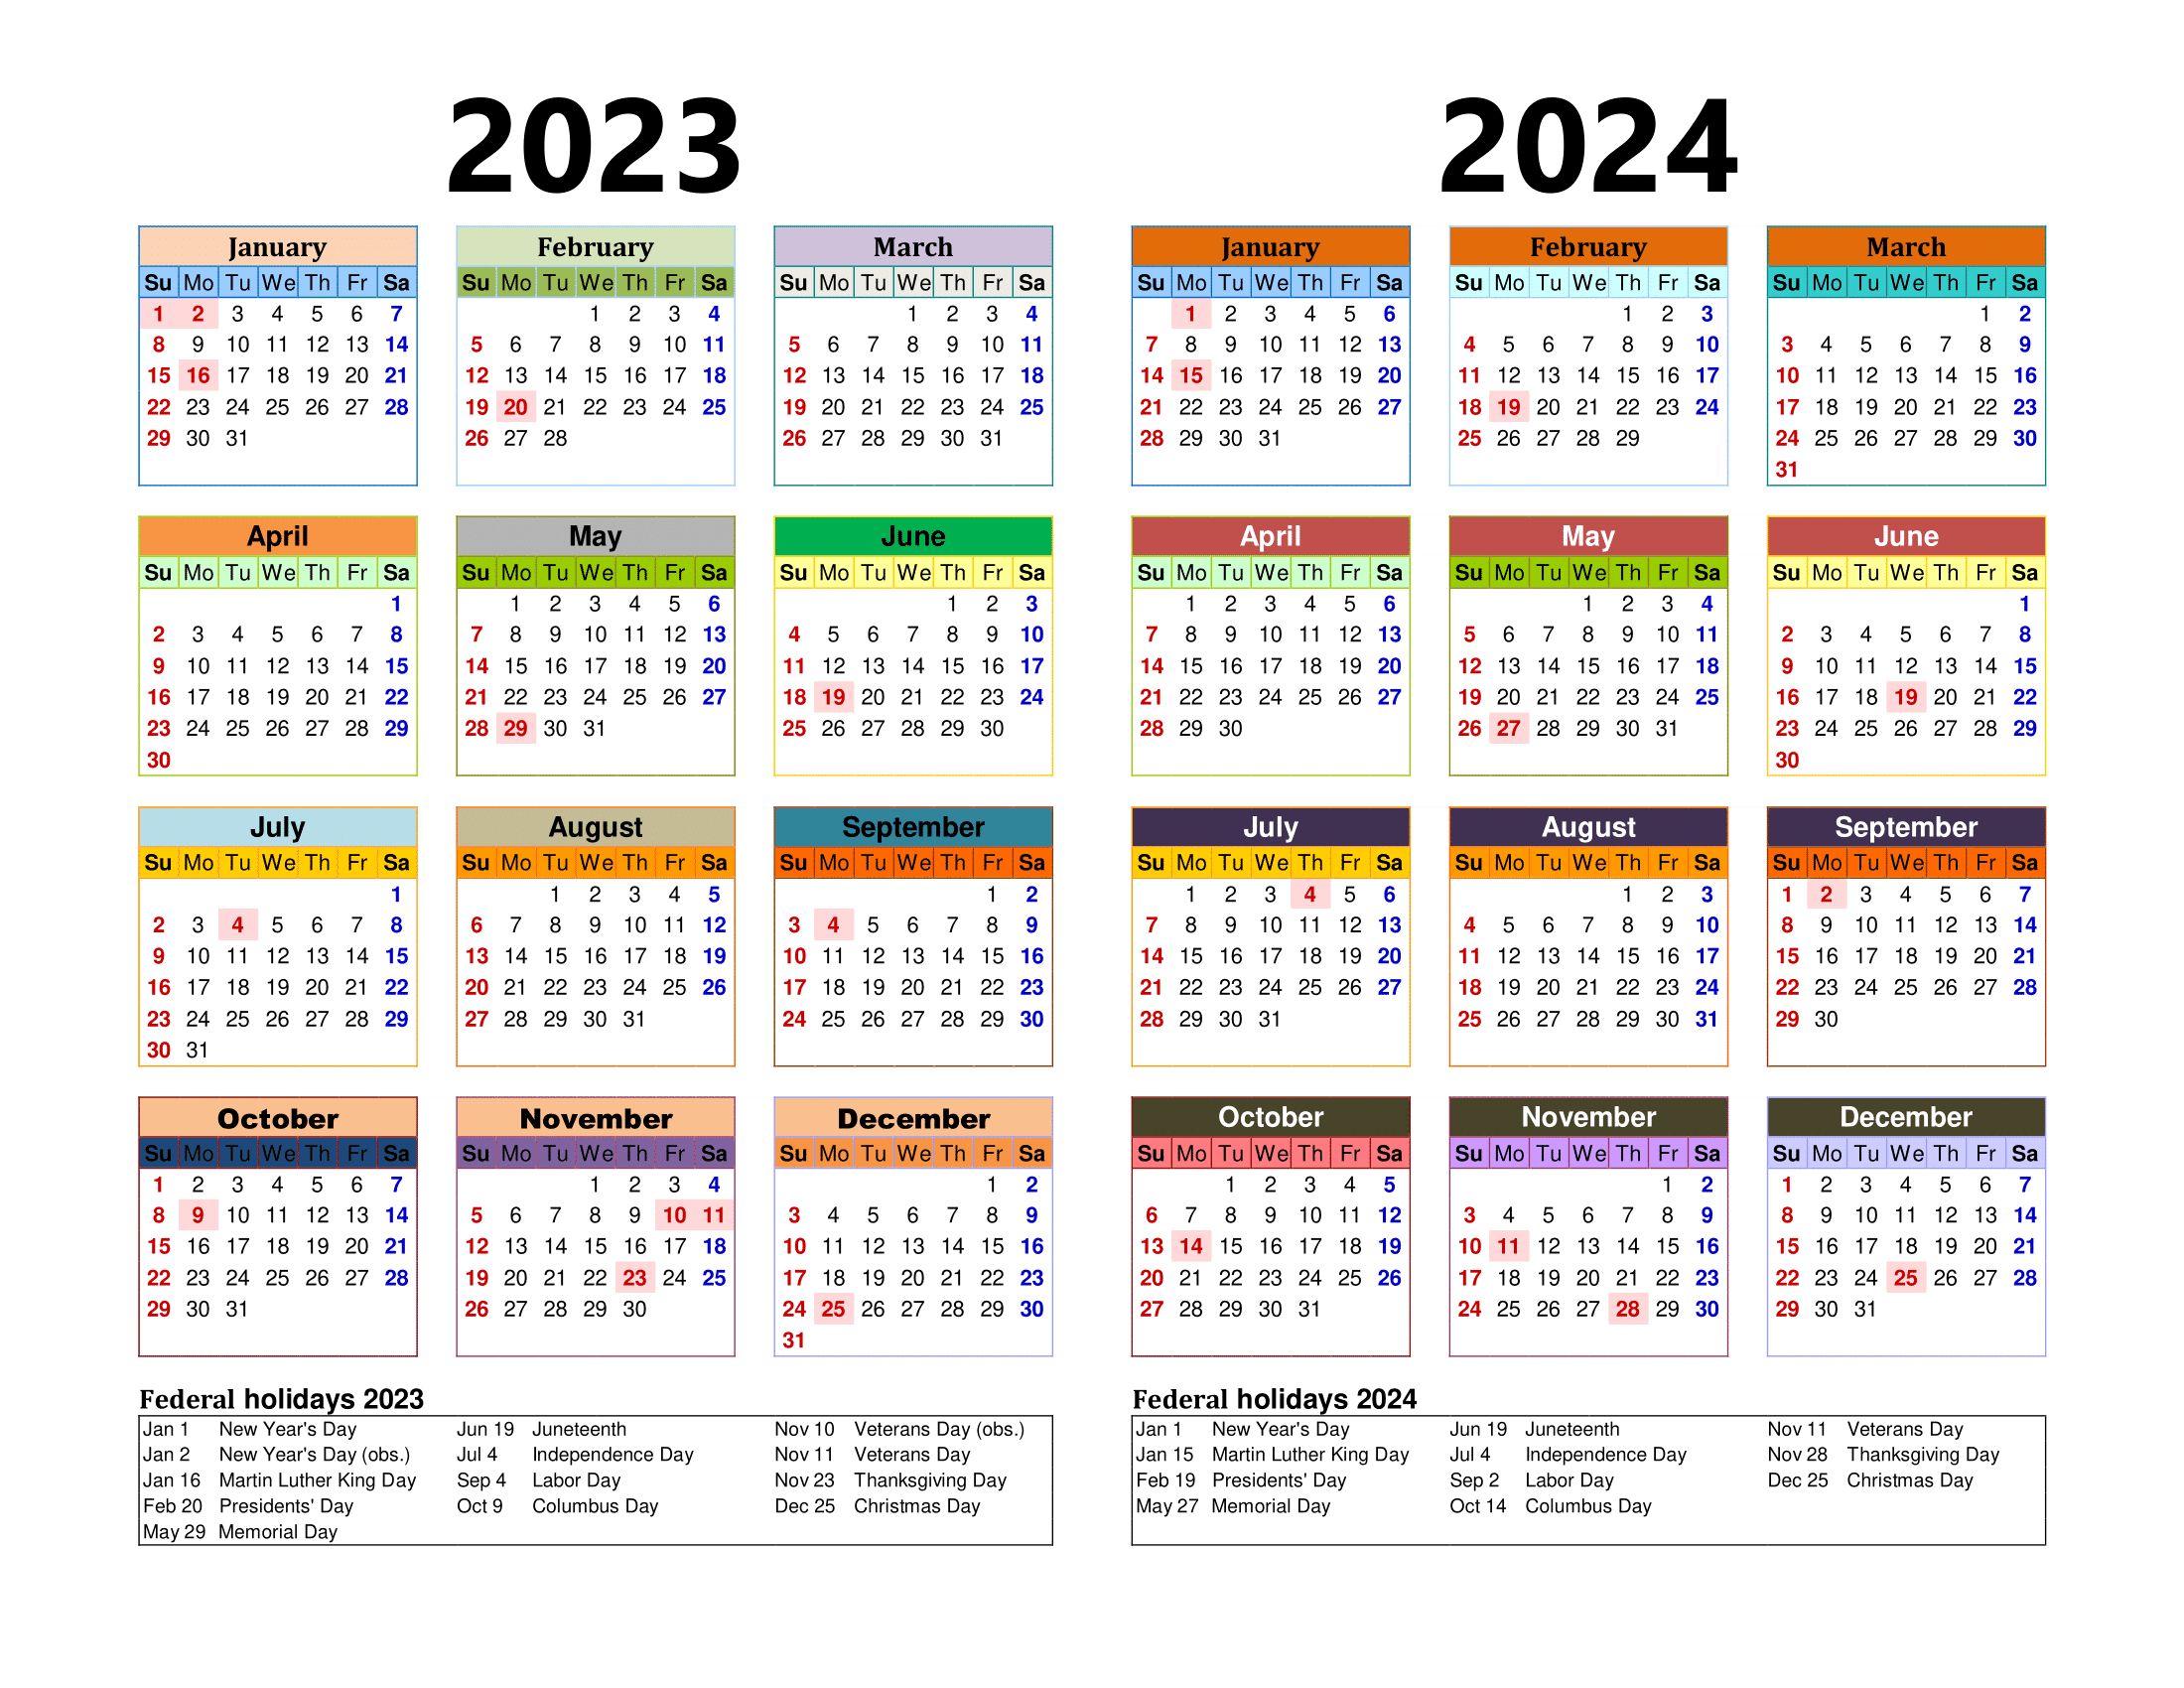 Free Printable Two Year Calendar Templates For 2023 And 2024 In Pdf | Year 2024 Calendar Hk